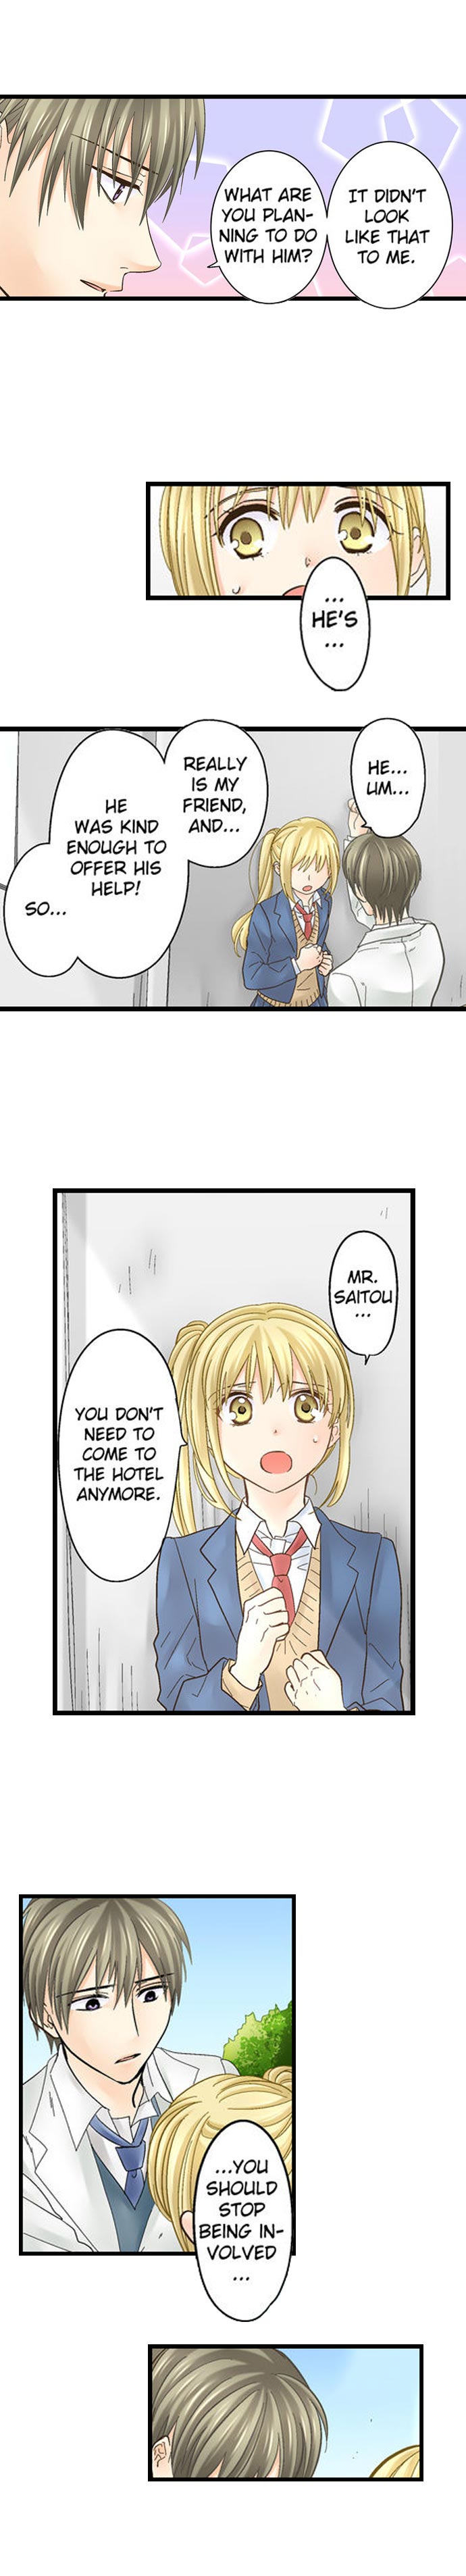 Running a Love Hotel with My Math Teacher - Chapter 27 Page 6